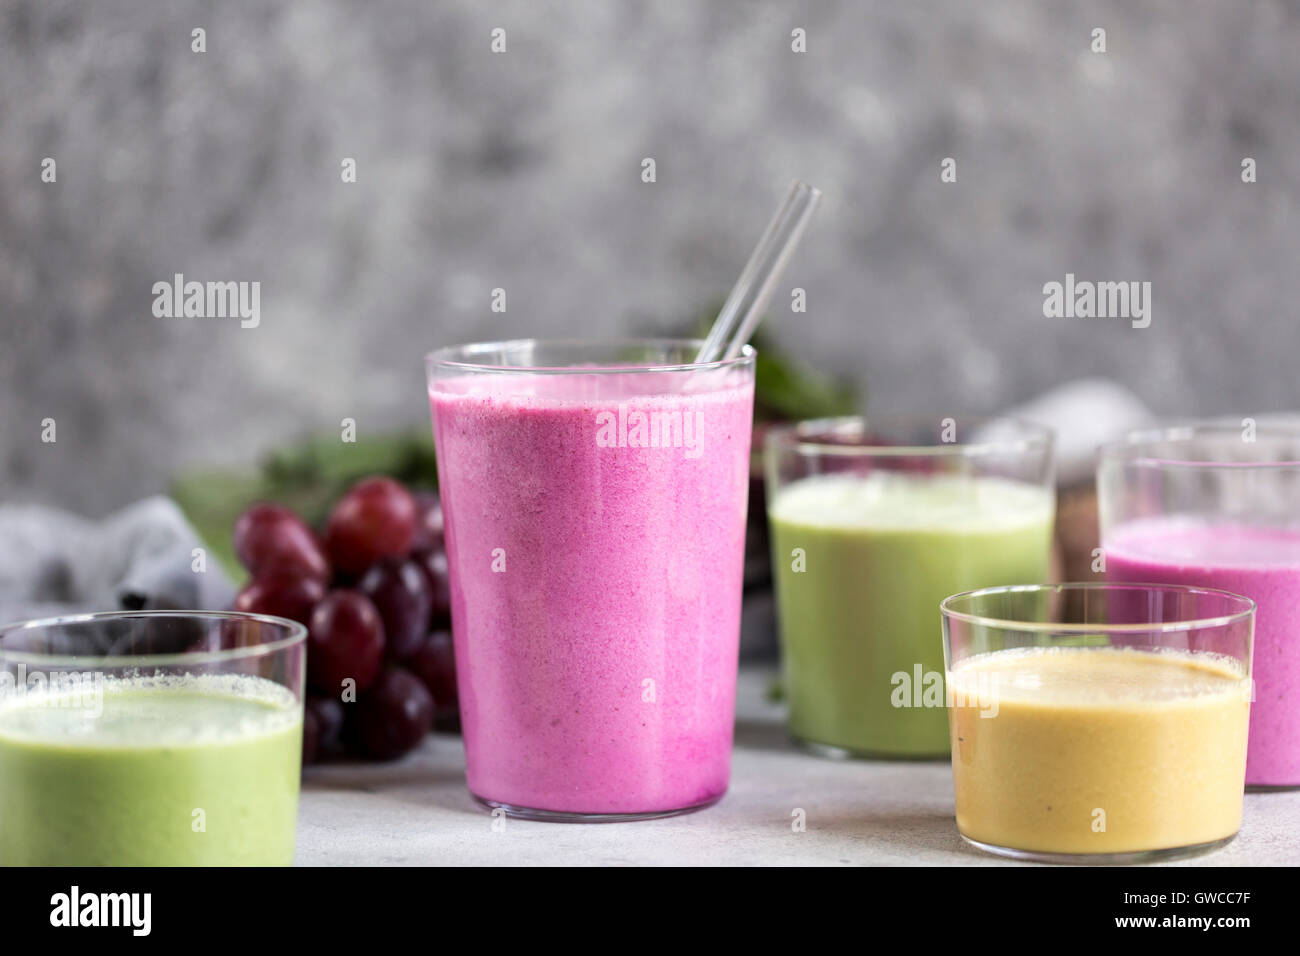 Several glasses of Multi-Colored Beet Smoothies are photographed from the front view. Stock Photo